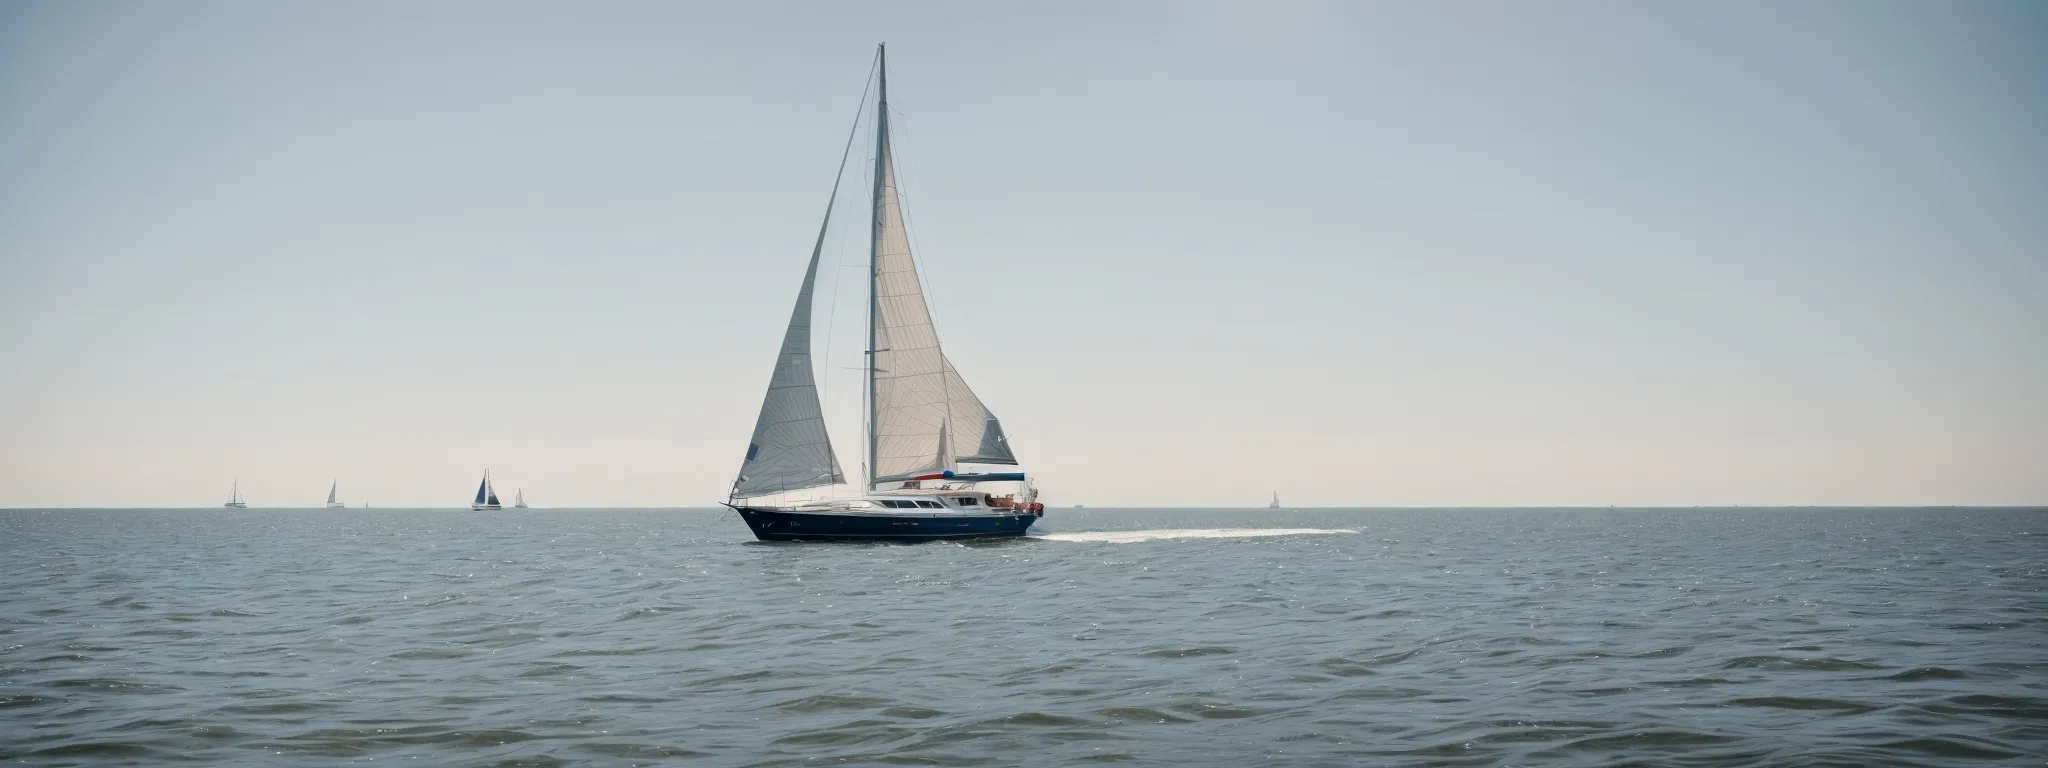 a sailboat navigates the calm chesapeake bay under a clear sky, symbolizing maryland's maritime businesses' journey through the digital market landscape.